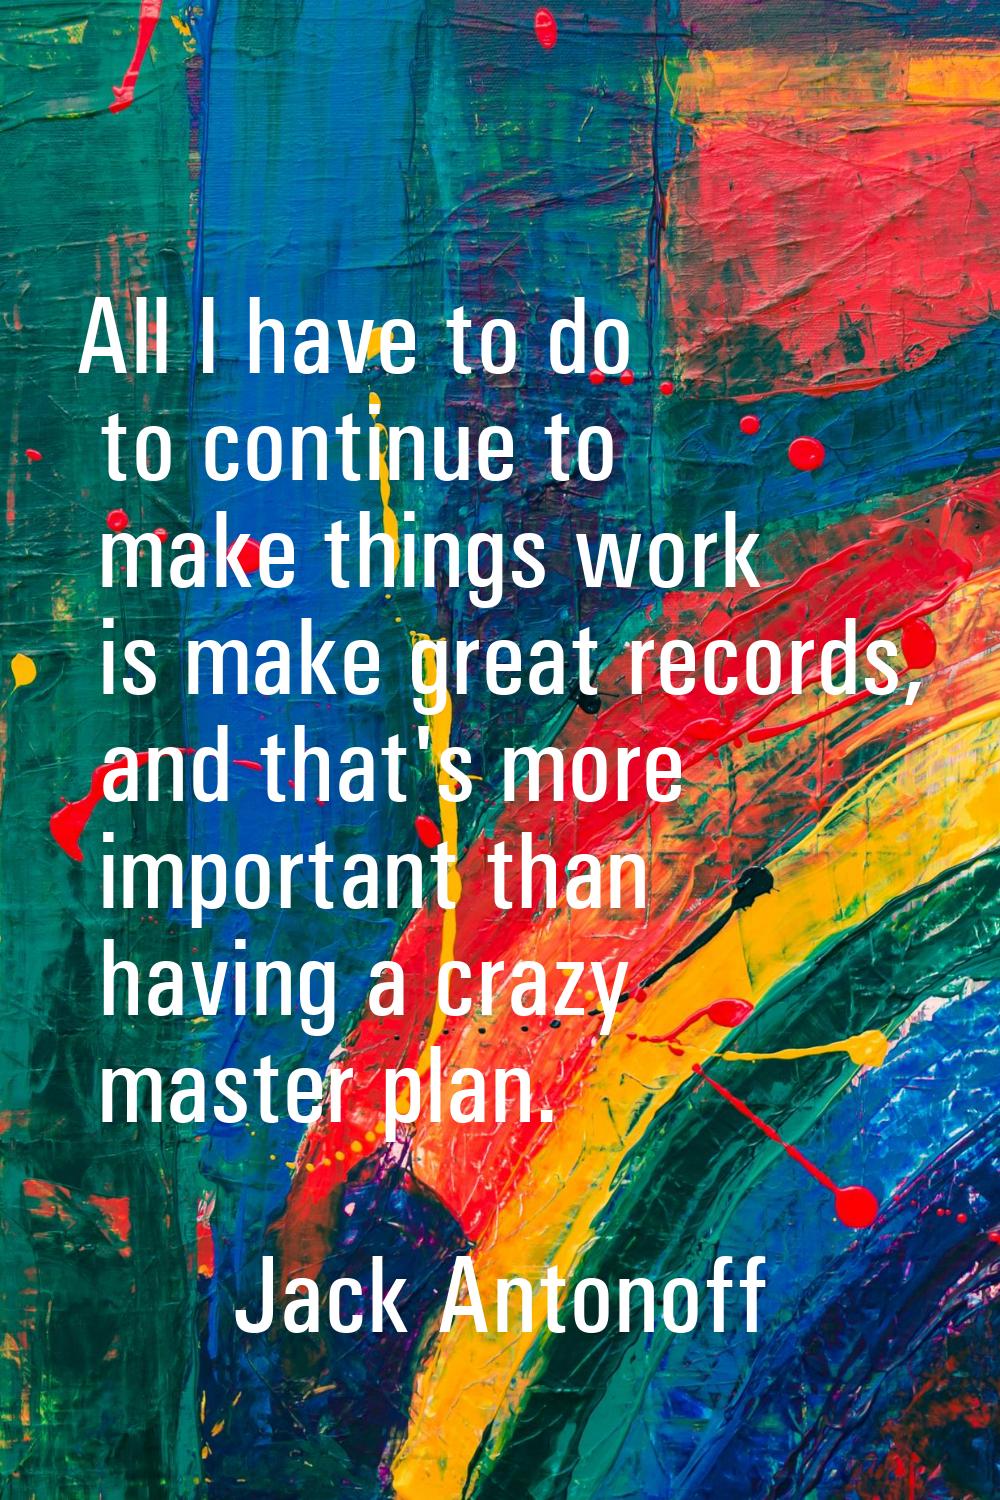 All I have to do to continue to make things work is make great records, and that's more important t